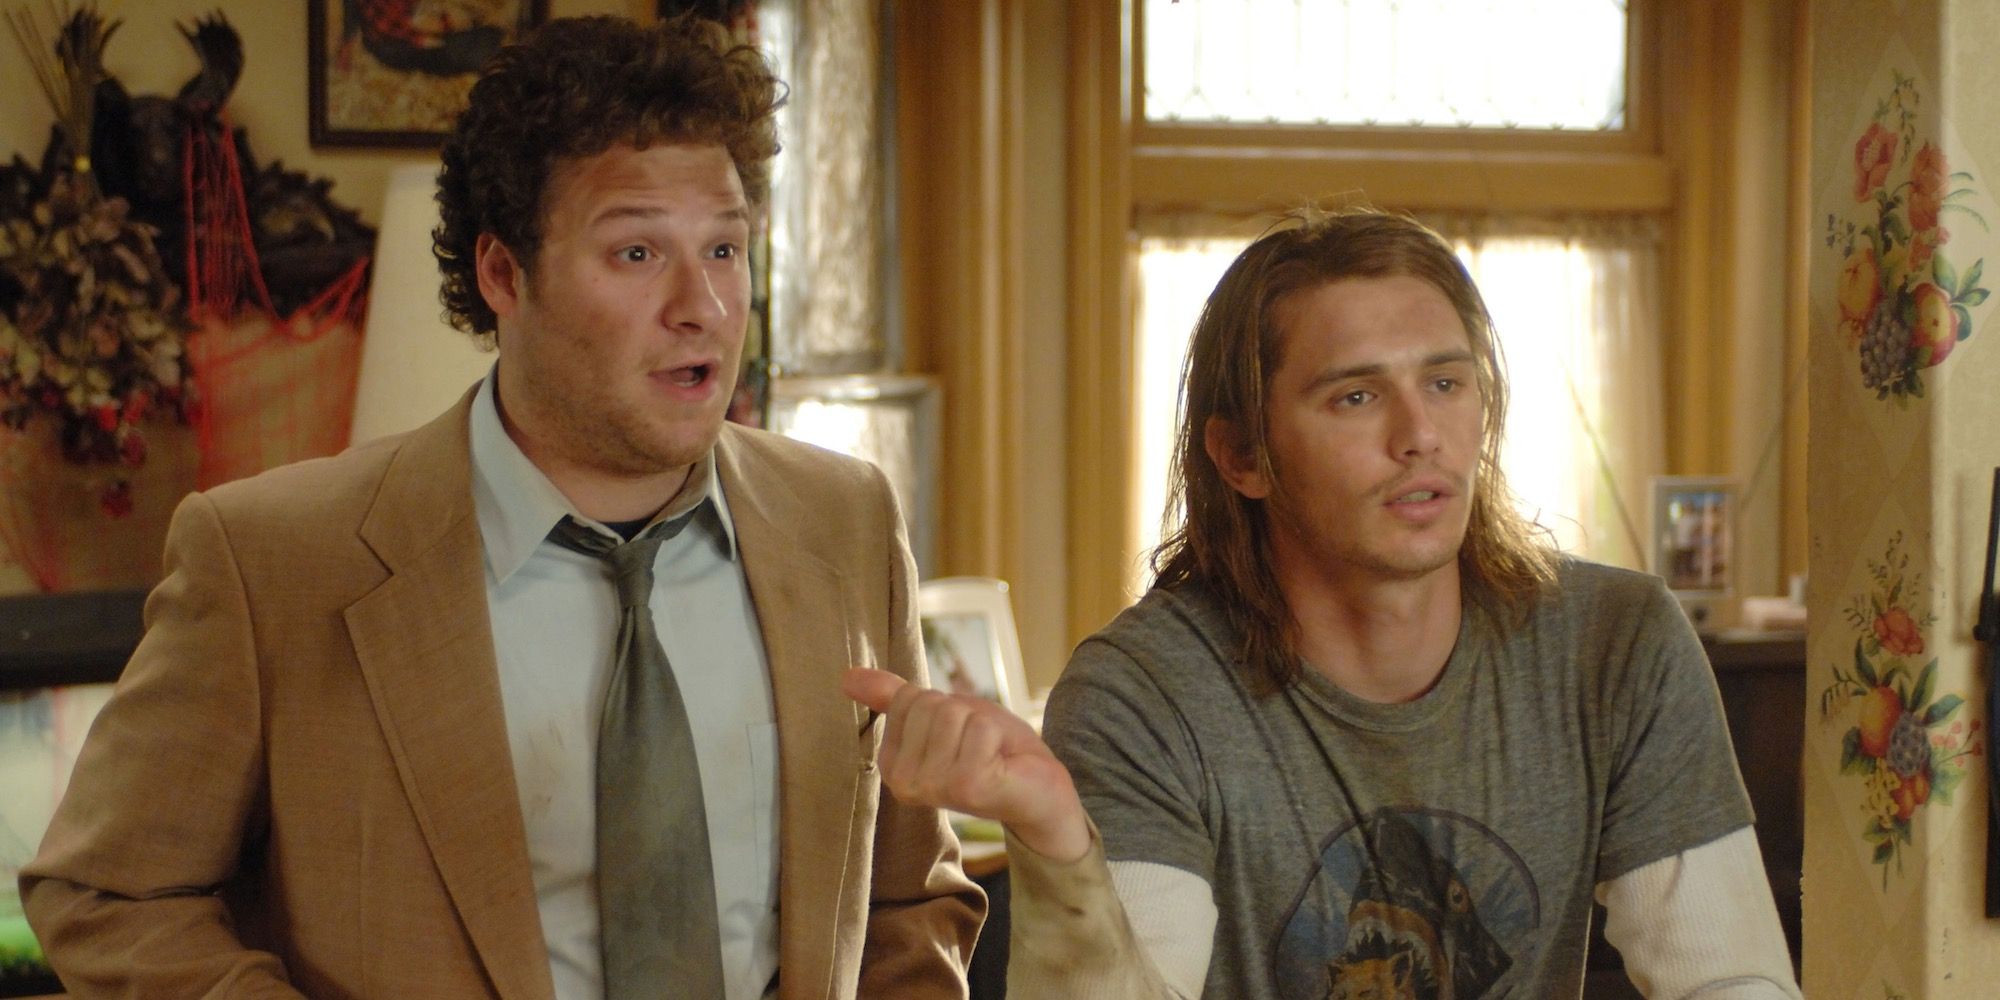 Seth Rogen and James Franco looking dirty and stoned in Pineapple Express